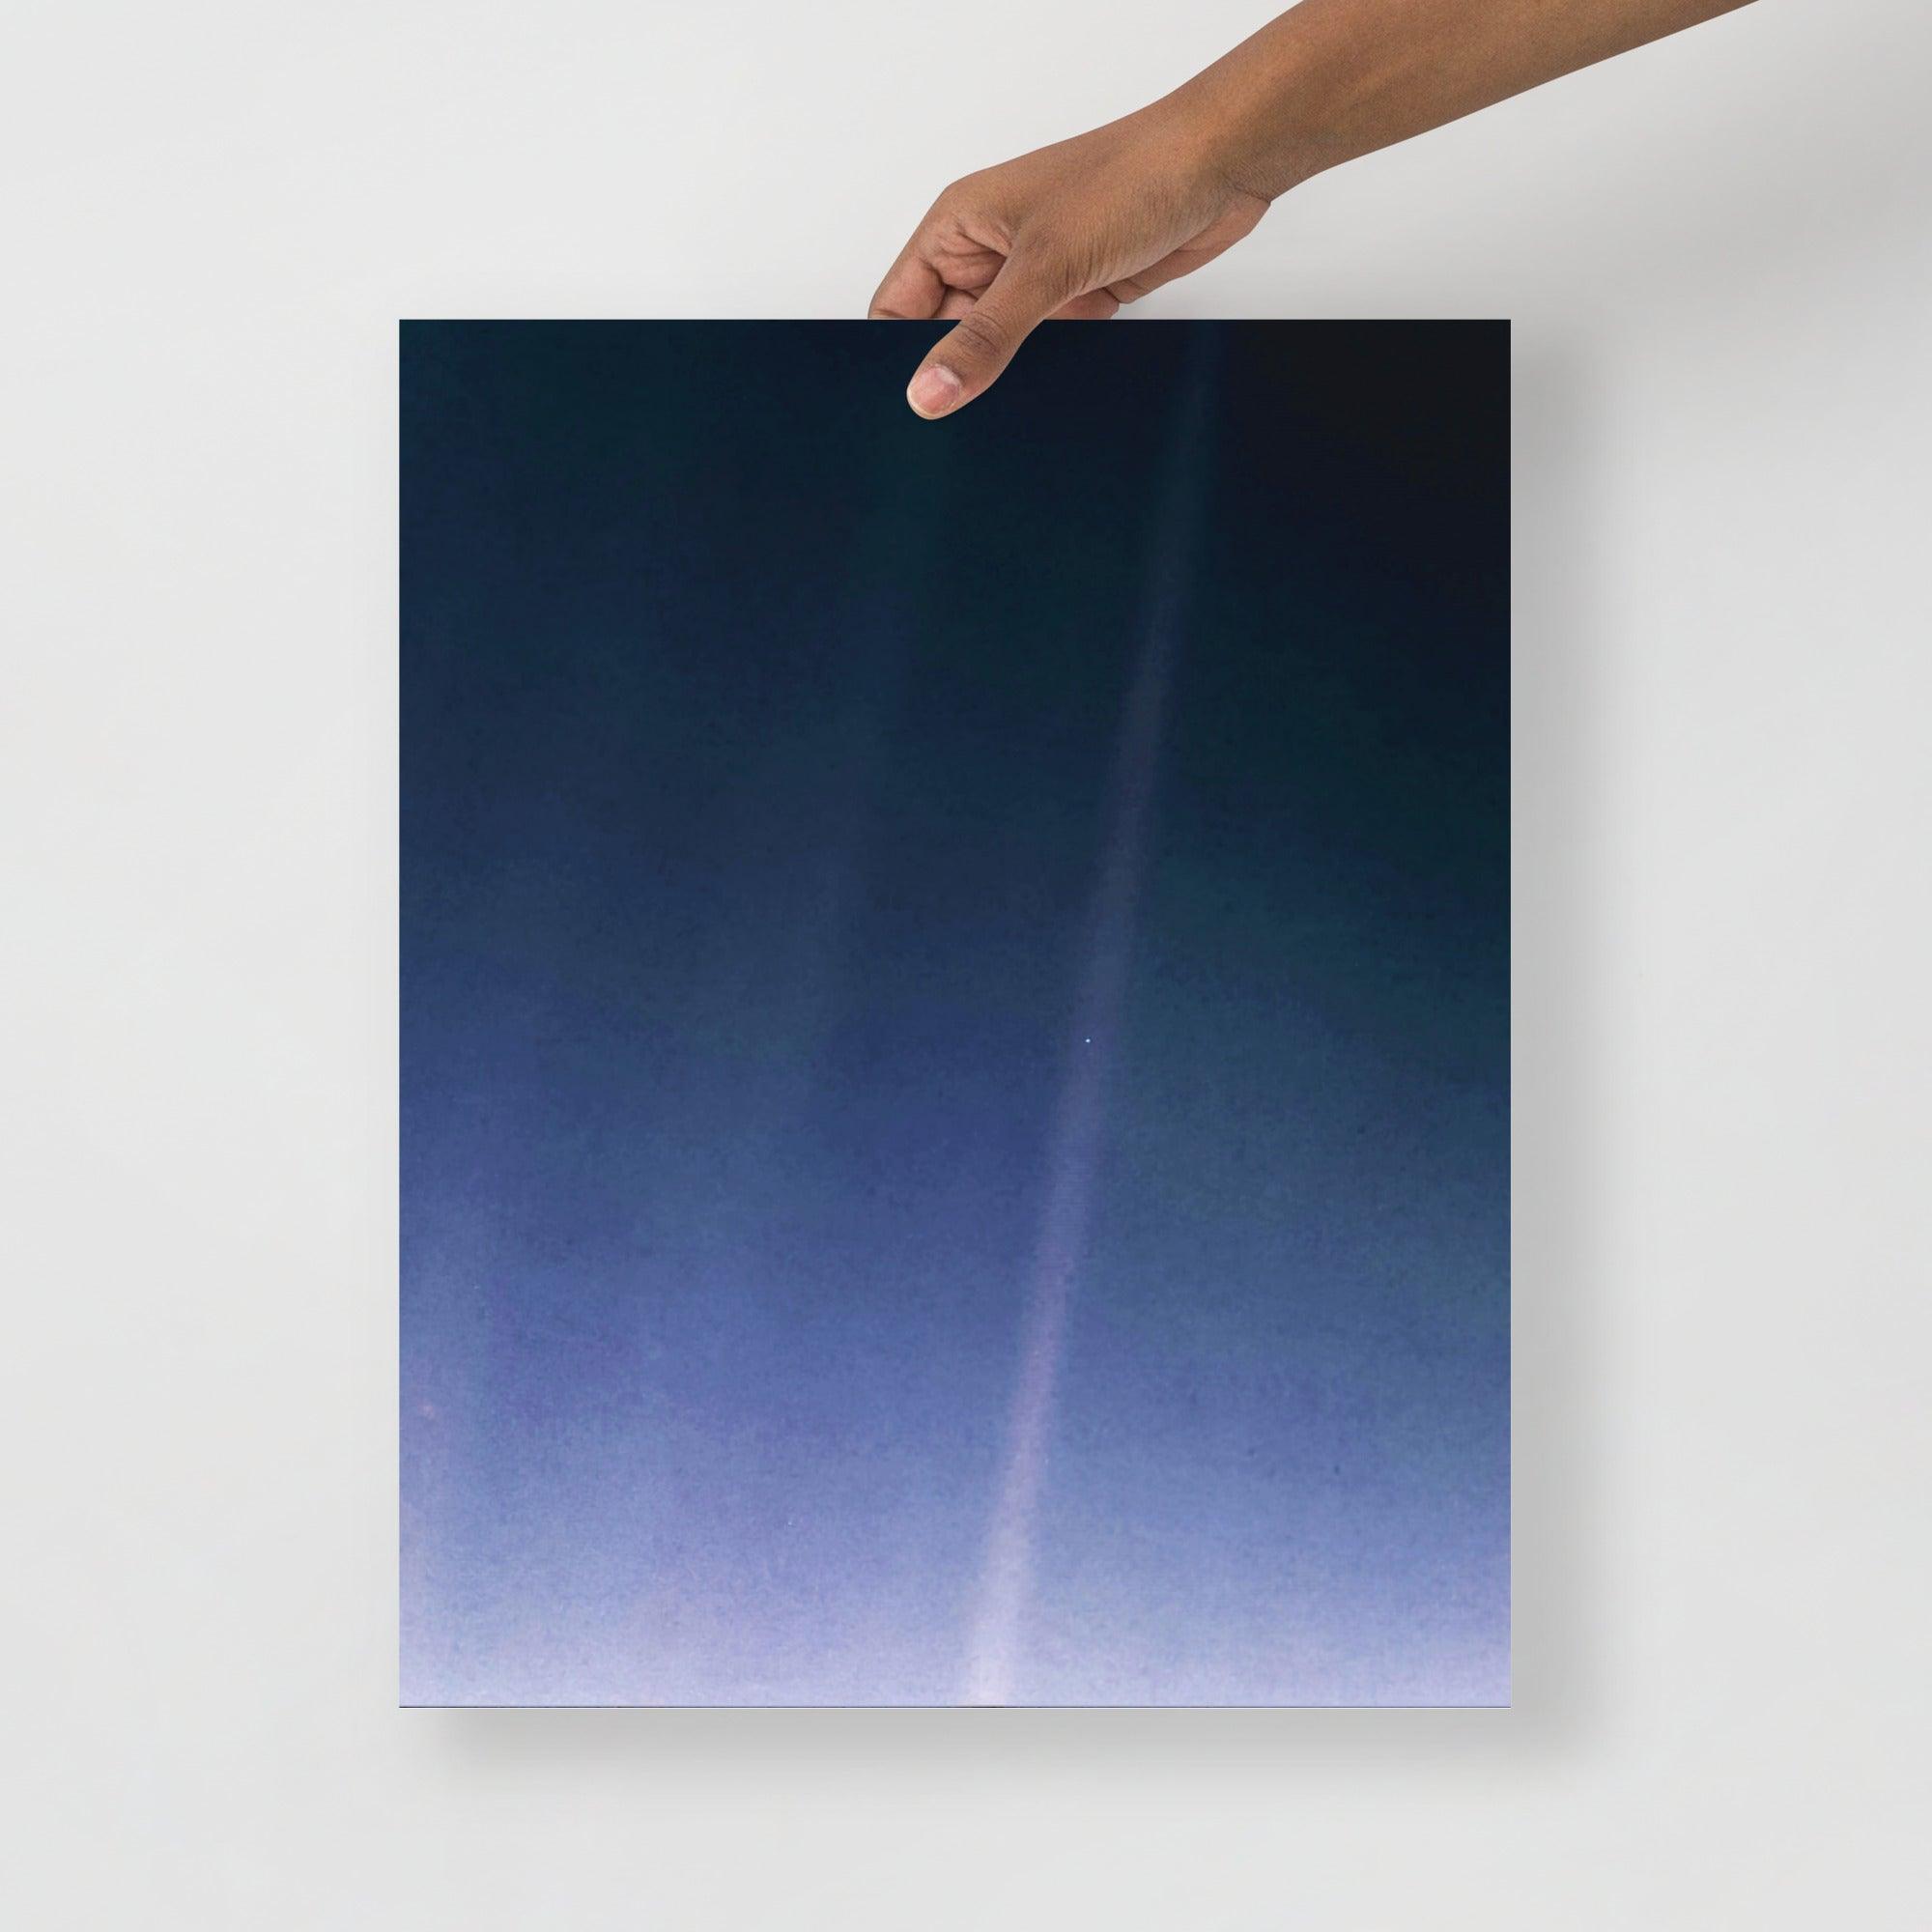 A Pale Blue Dot poster on a plain backdrop in size 16x20”.